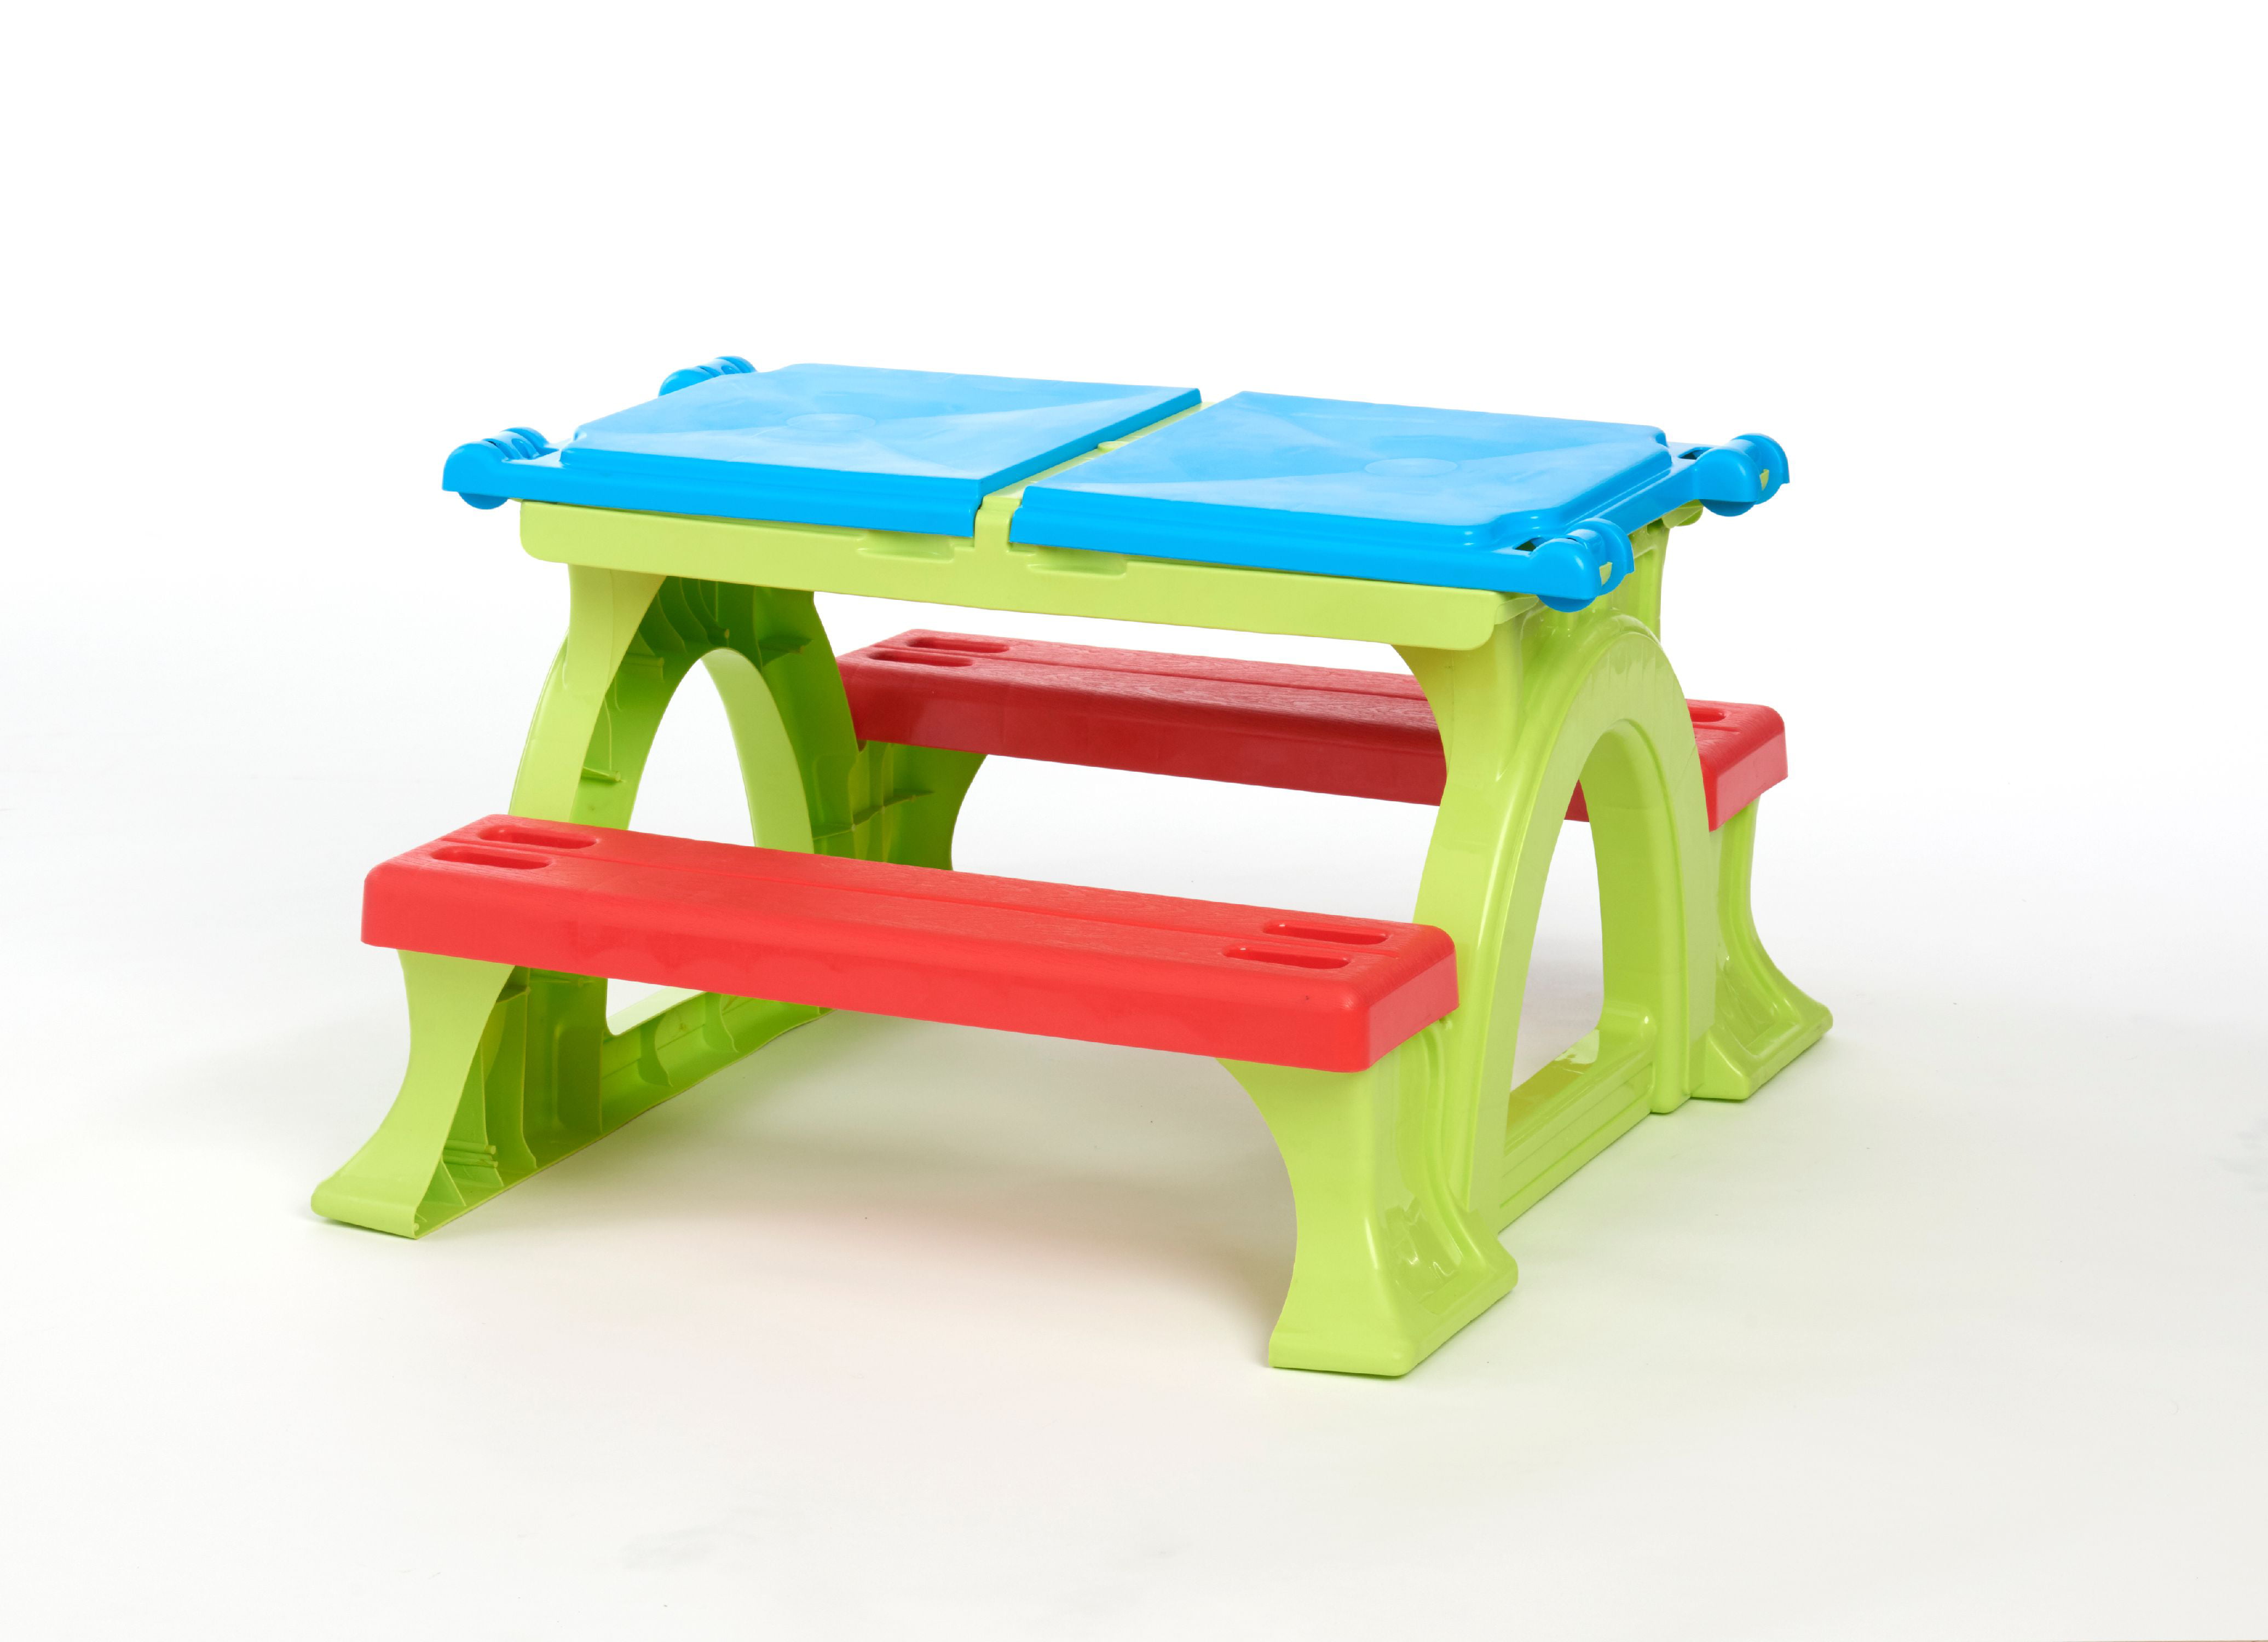 Small Play Table for sitting on the floor Preschool Bench Step Stool